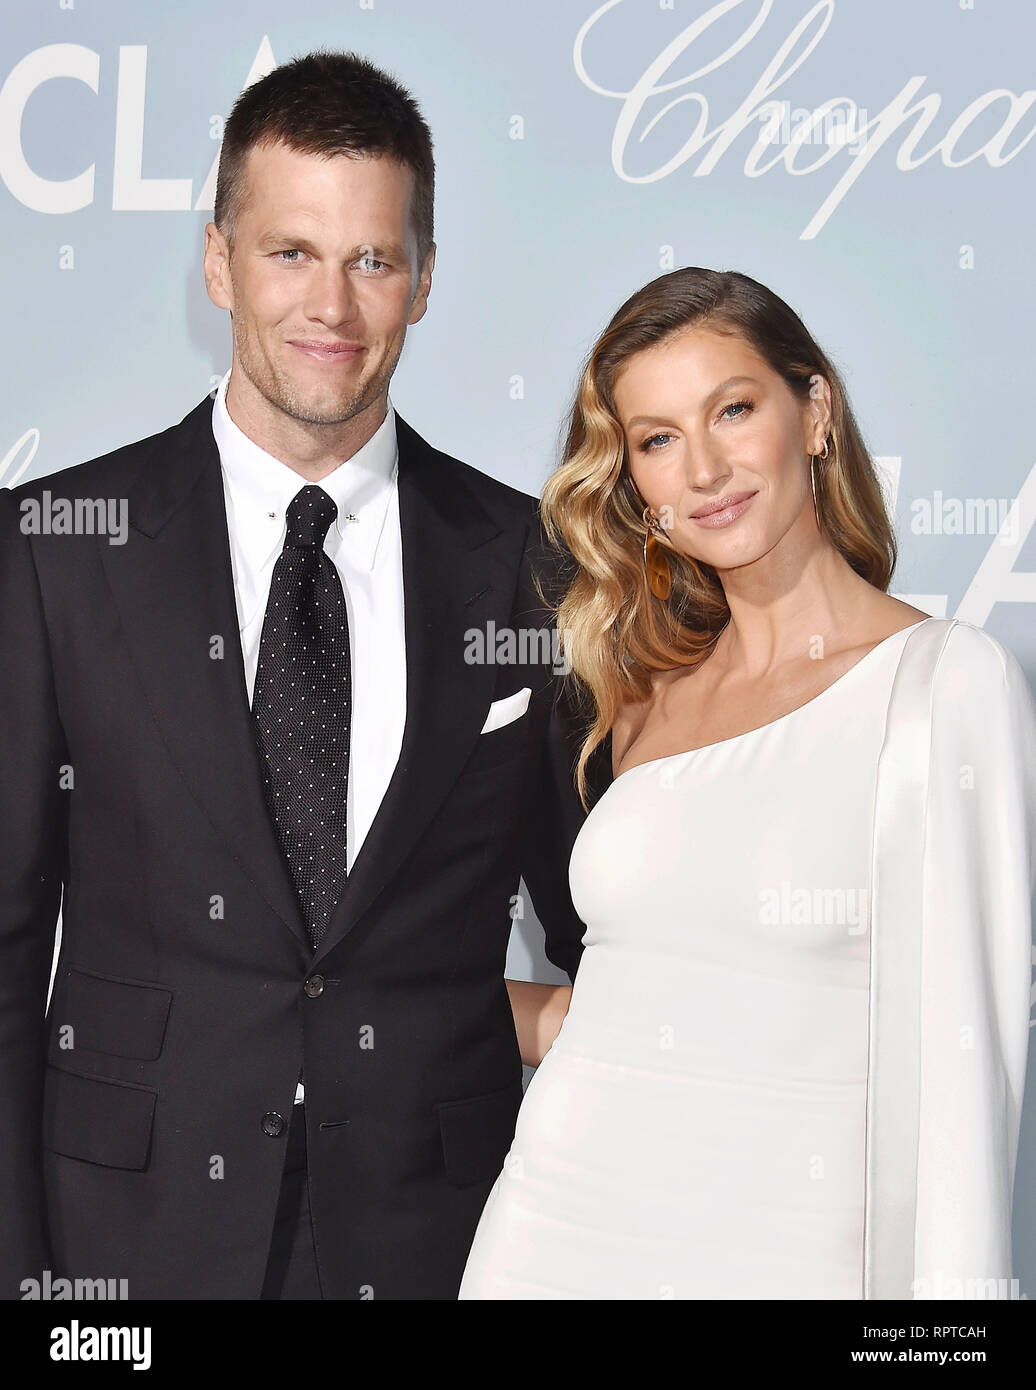 LOS ANGELES, CA - FEBRUARY 21: Tom Brady (L) and Gisele Bündchen arrive at the Hollywood For Science Gala at Private Residence on February 21, 2019 in Stock Photo